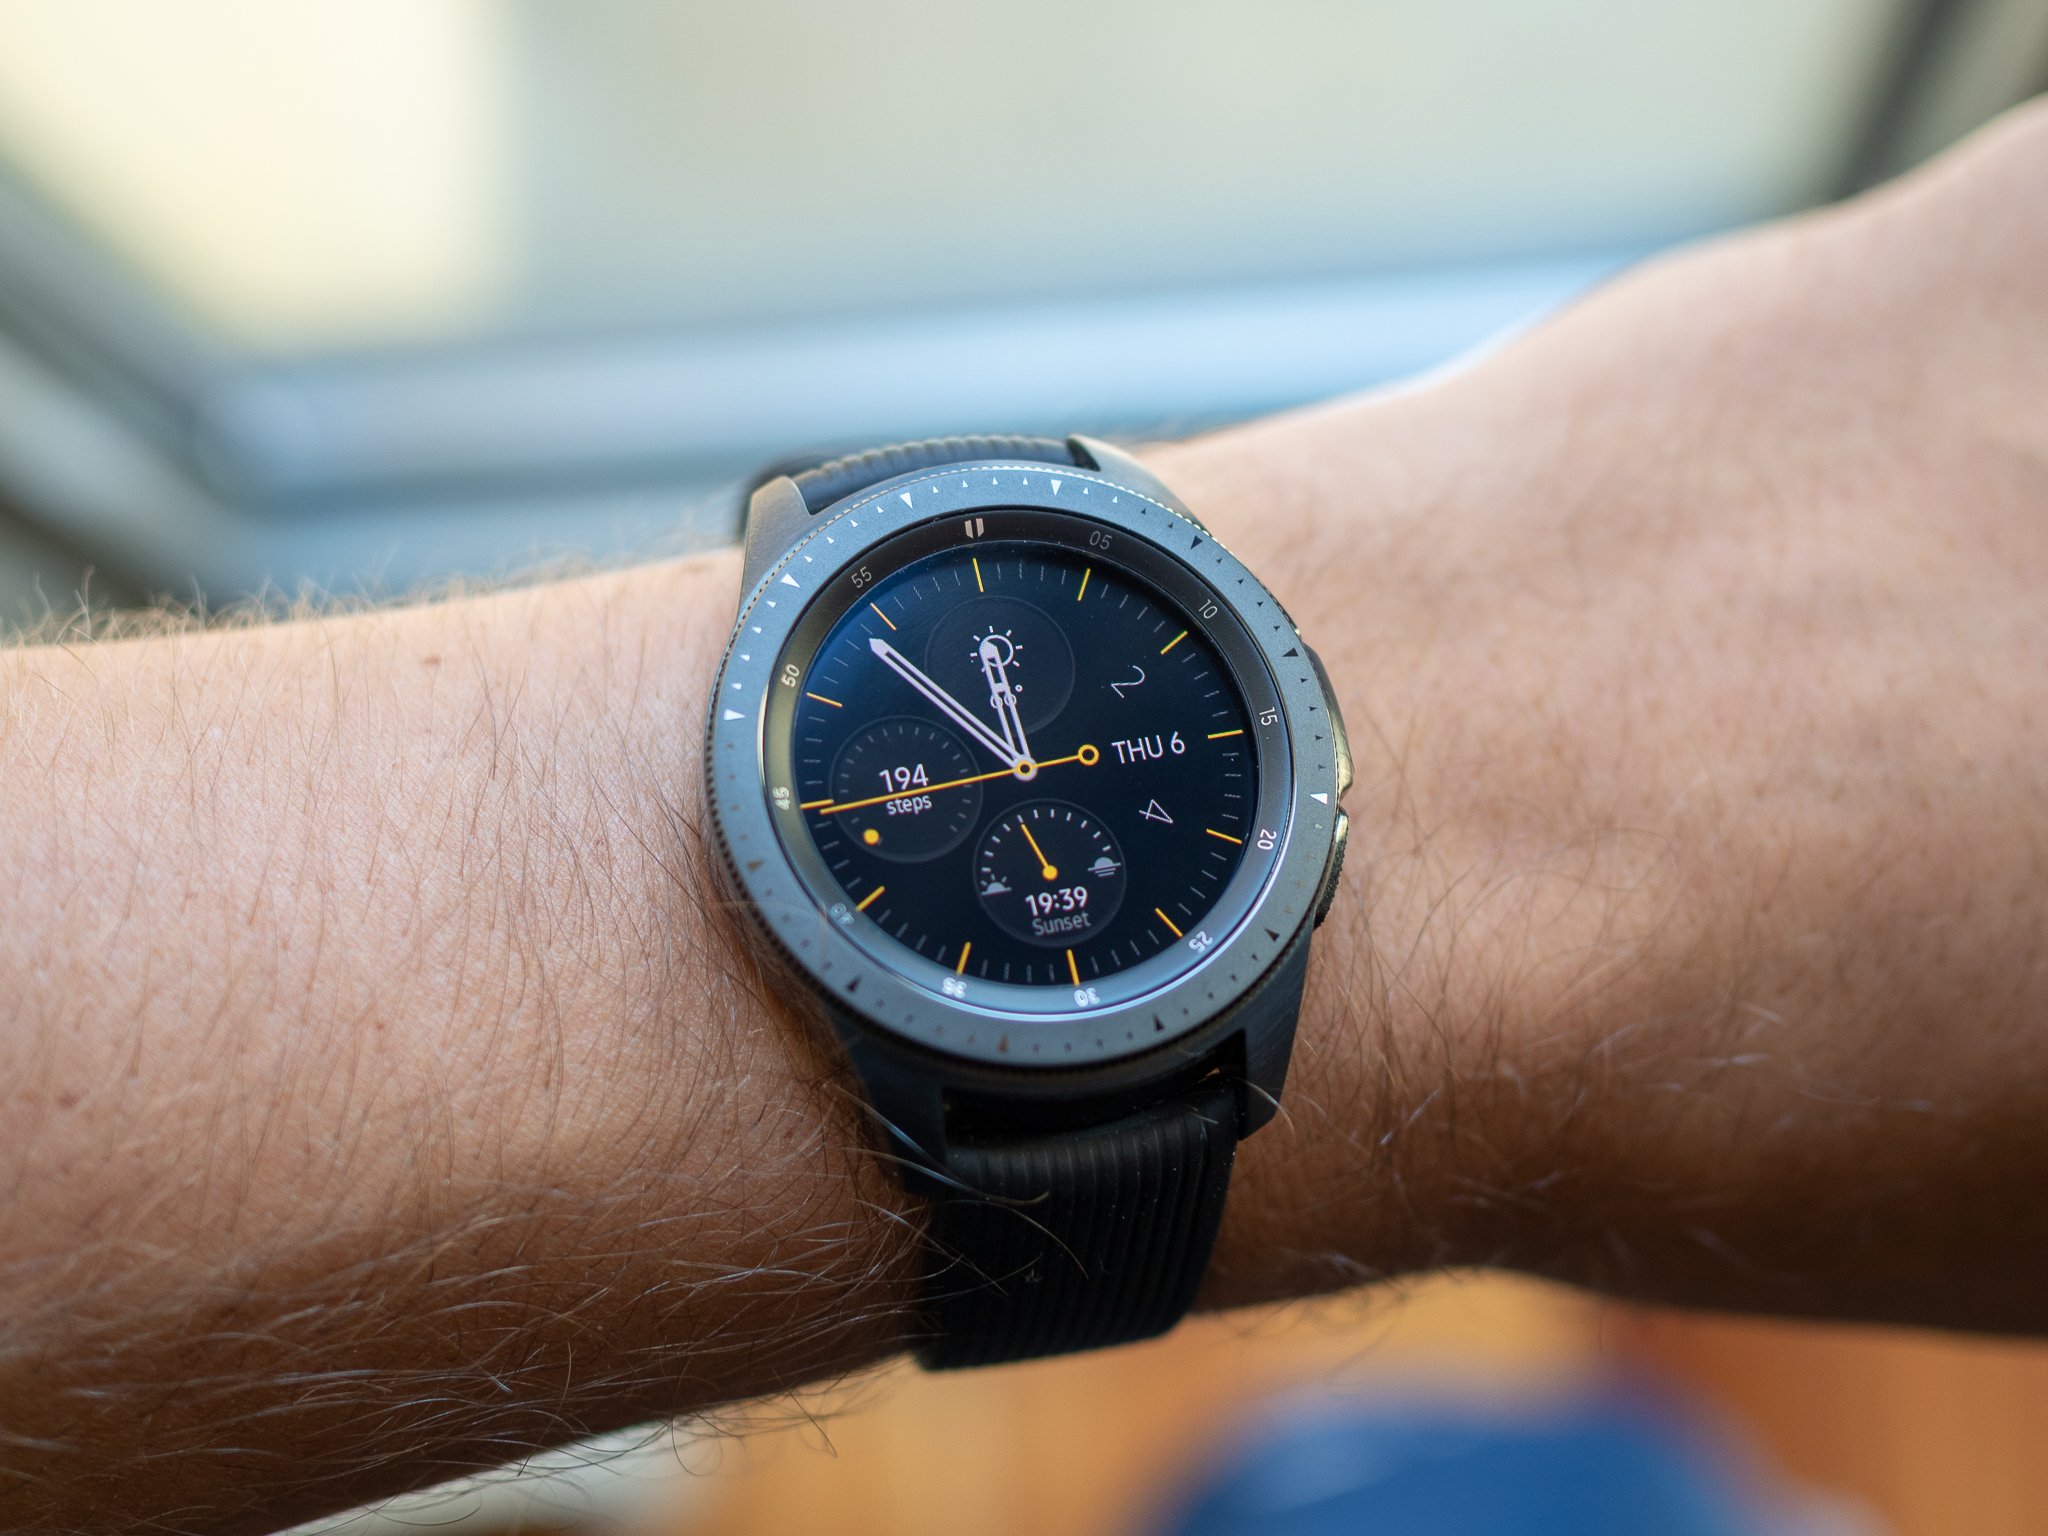 Best bands for Samsung Galaxy Watch 46mm in 2021